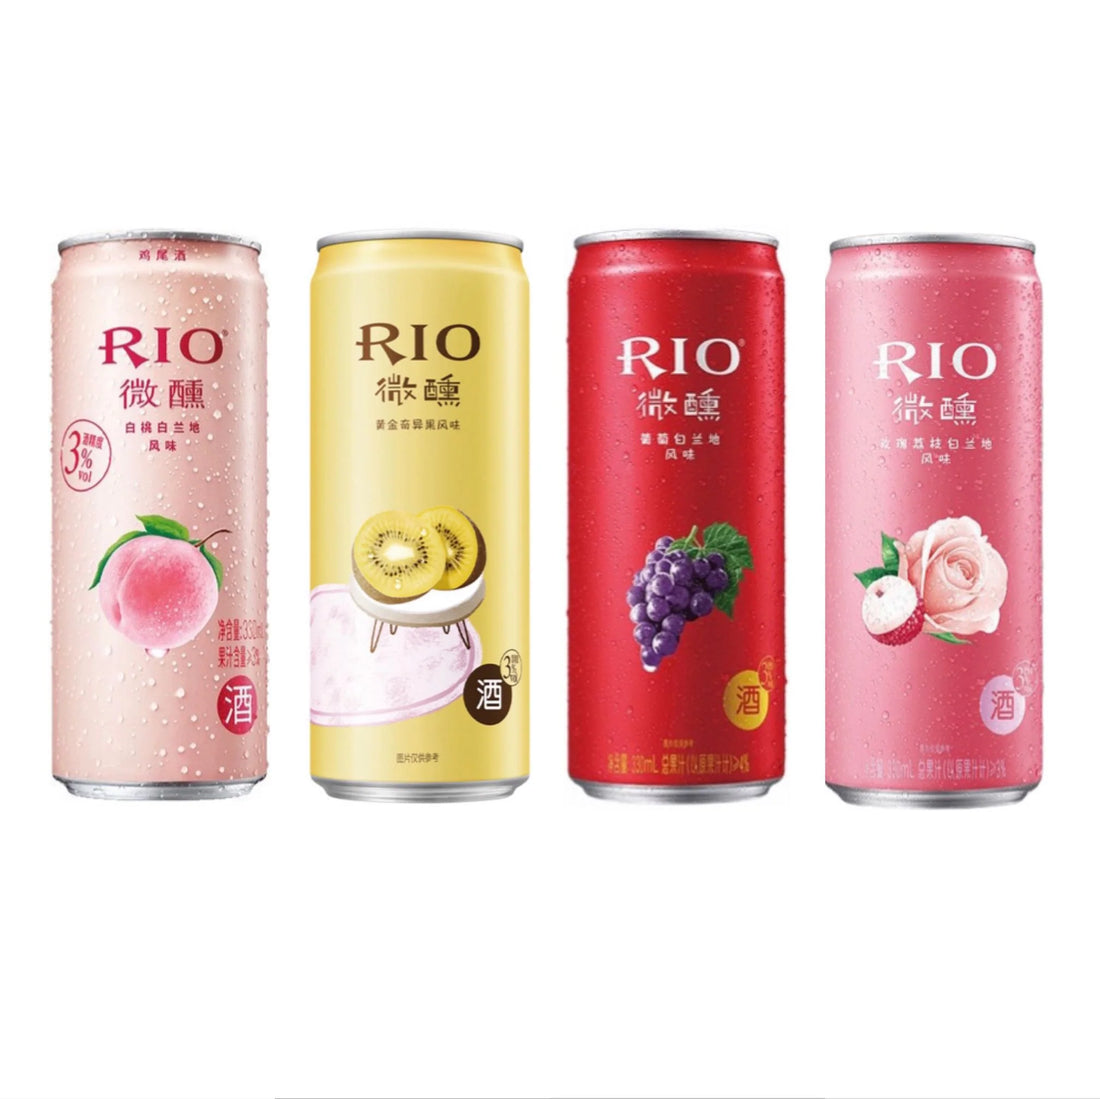 Rio drink from China